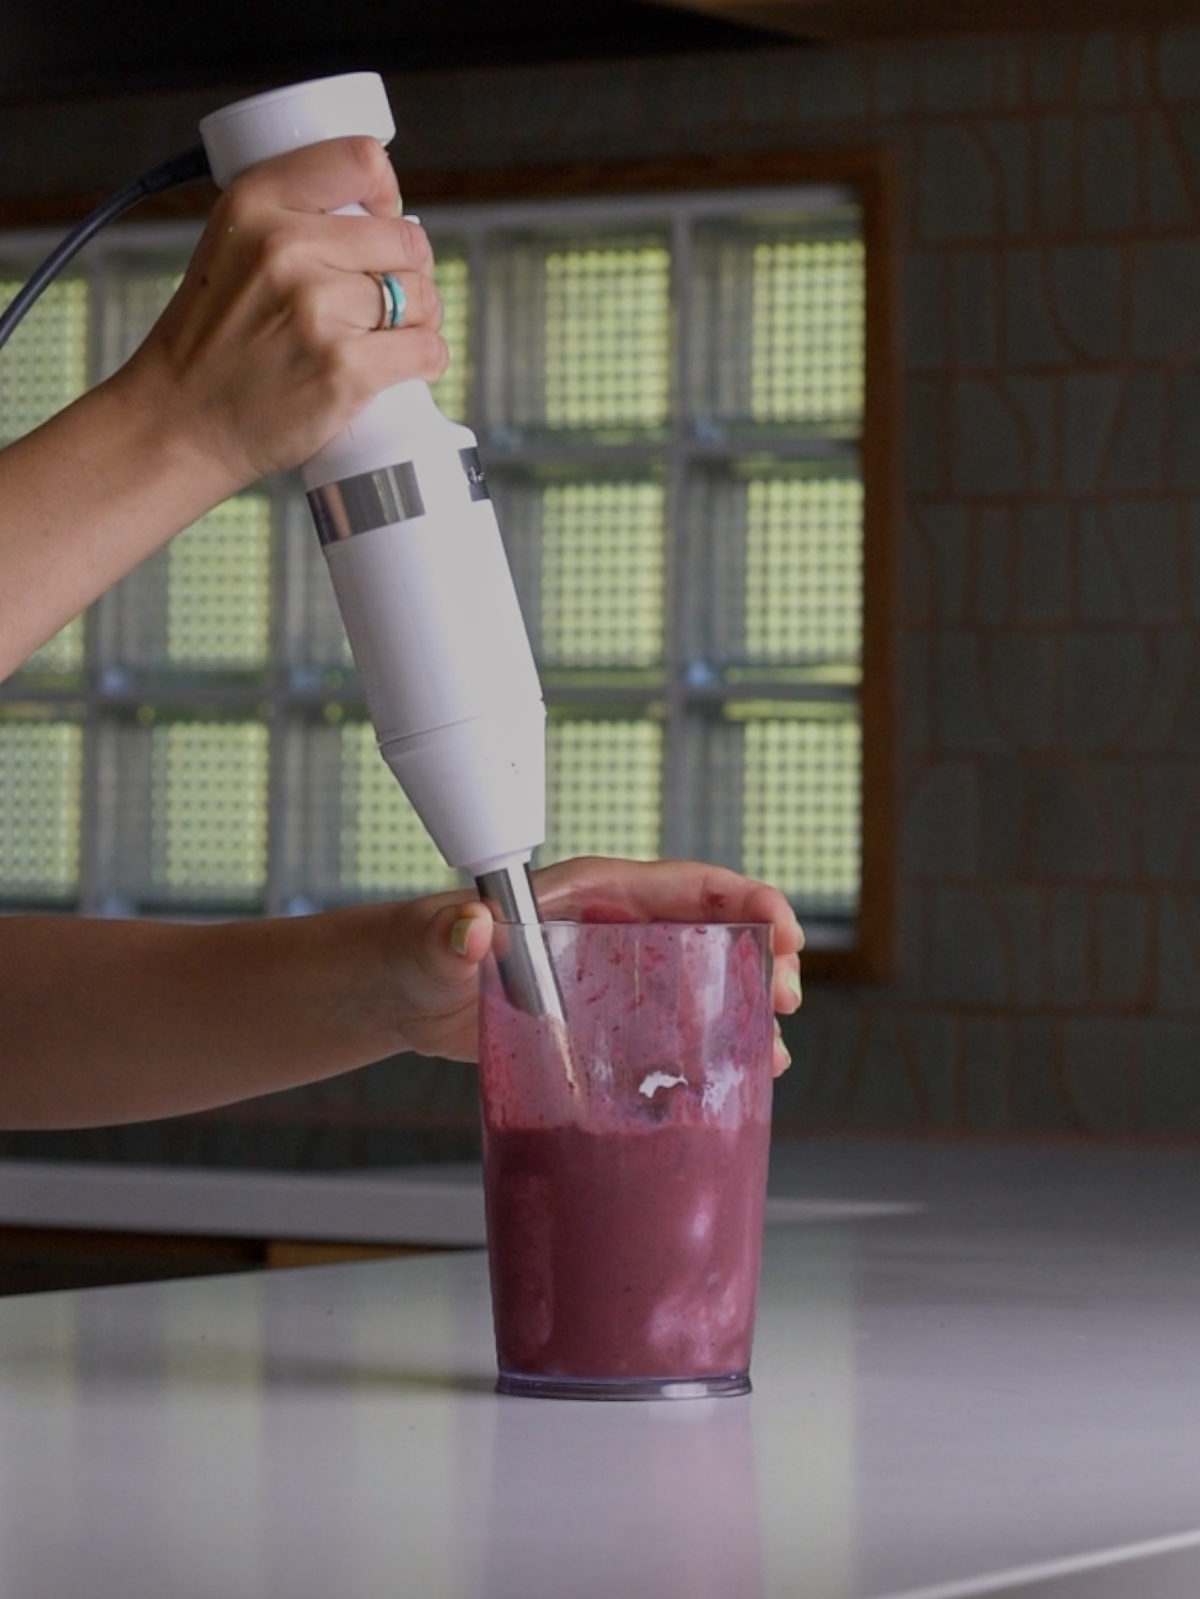 Blending a thick, purple liquid using a white immersion blender.